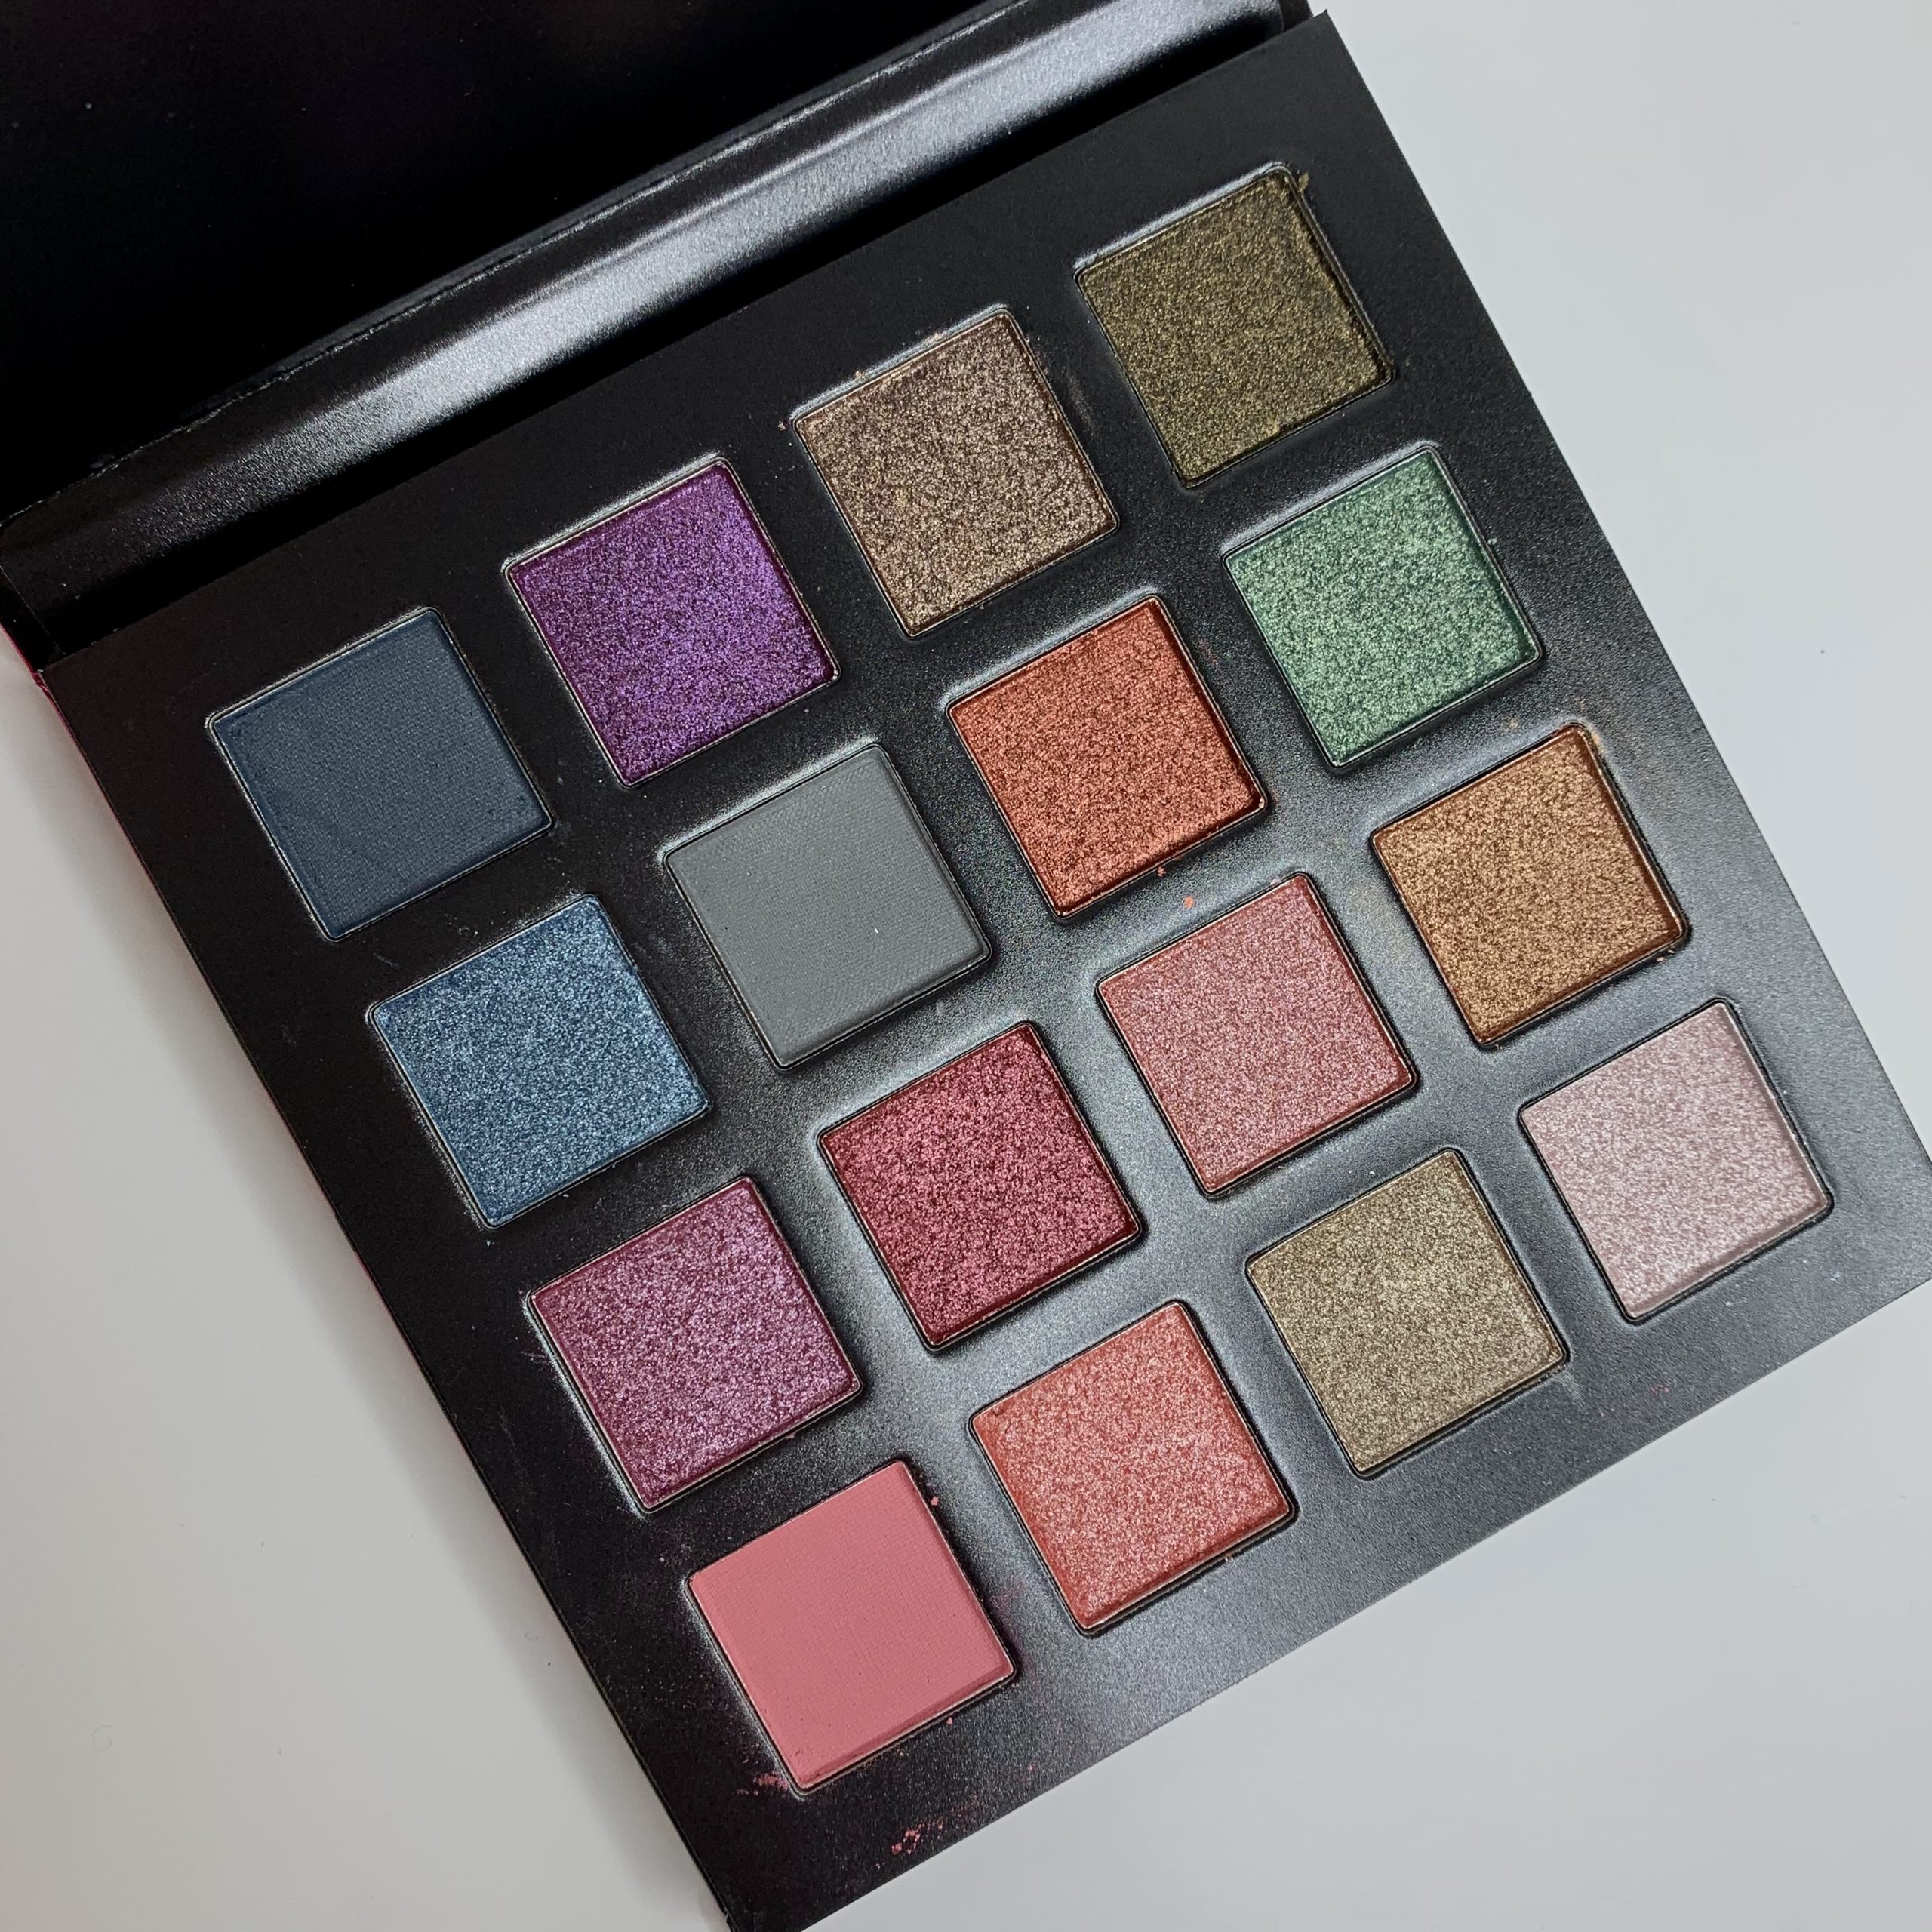 highly pigmented eye shadow